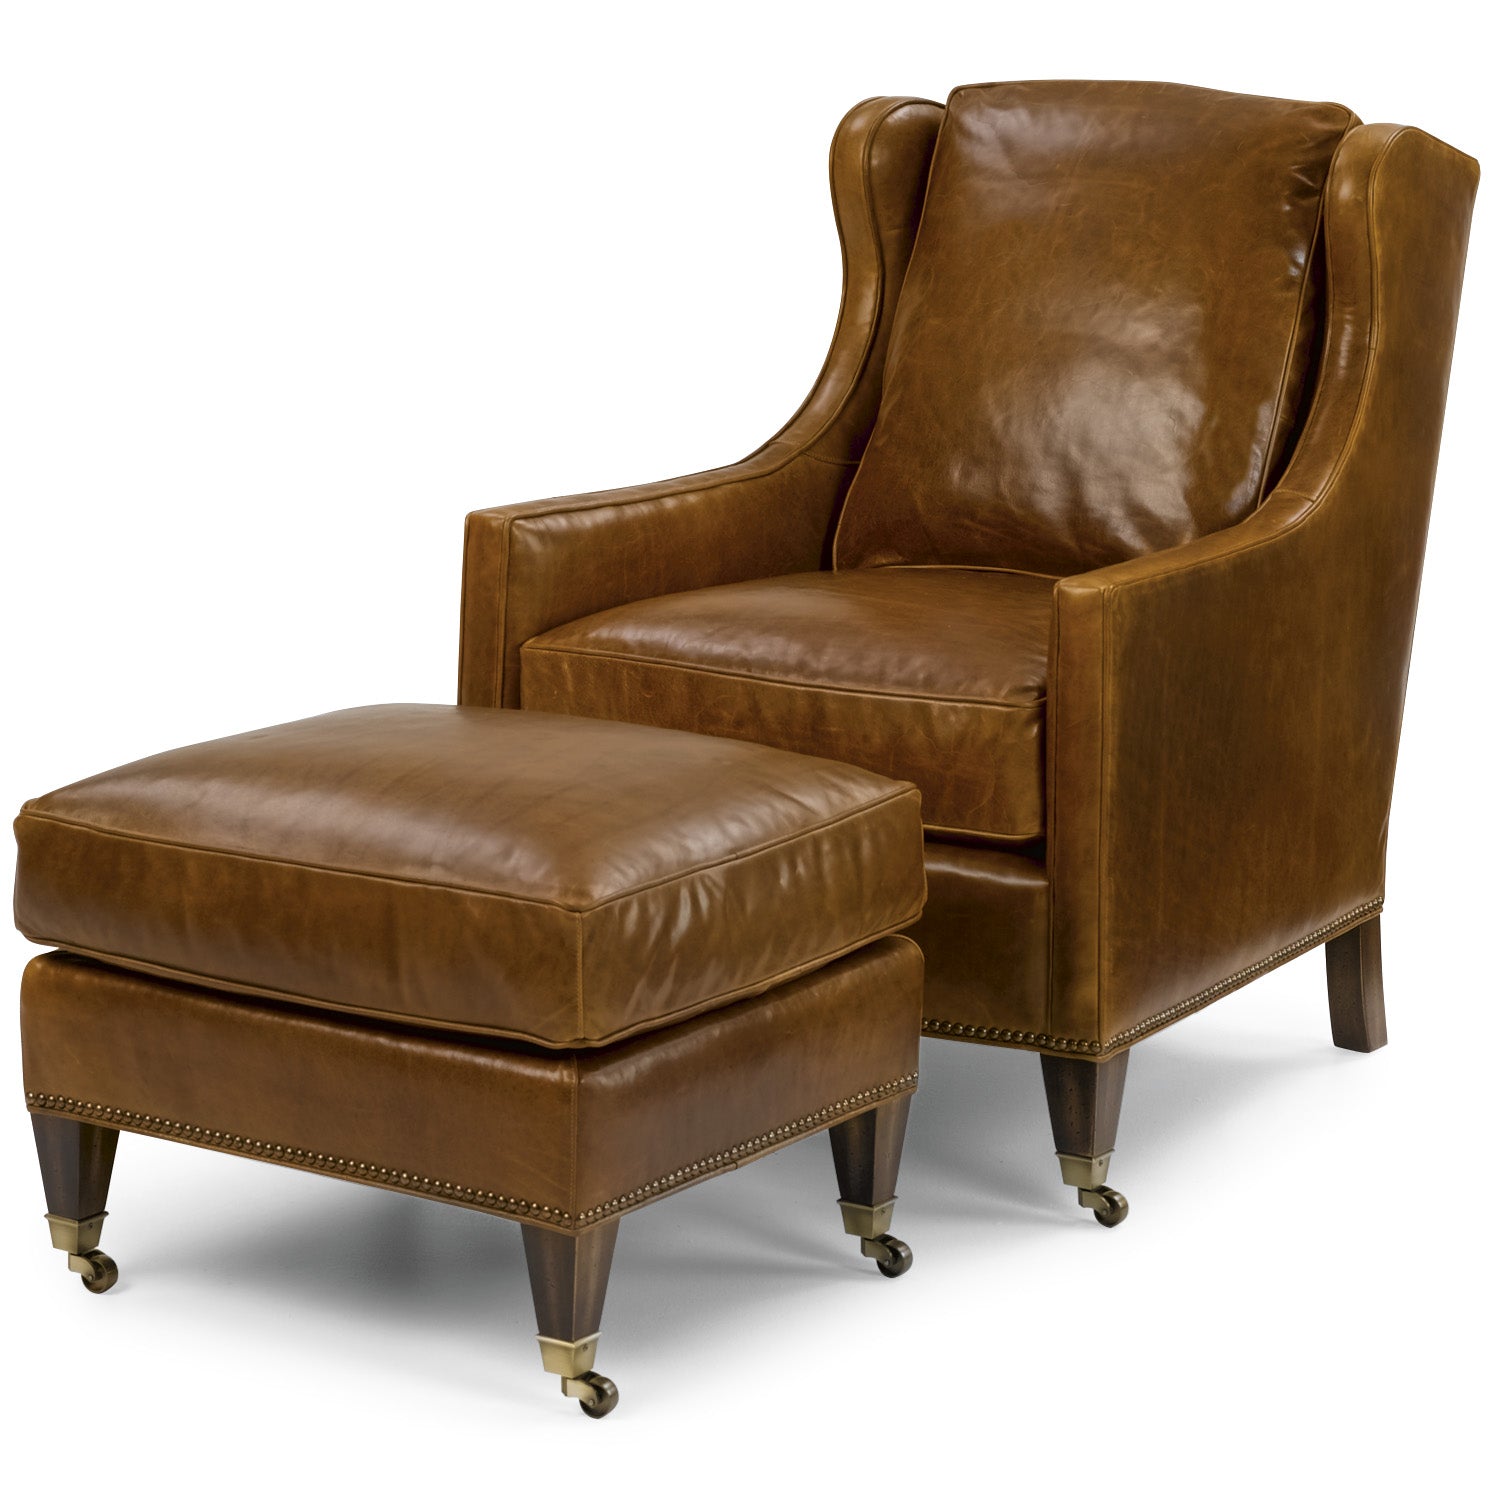 Sawyer Leather Chair and Ottoman by Wesley Hall shown in Pasadena Pecan leather